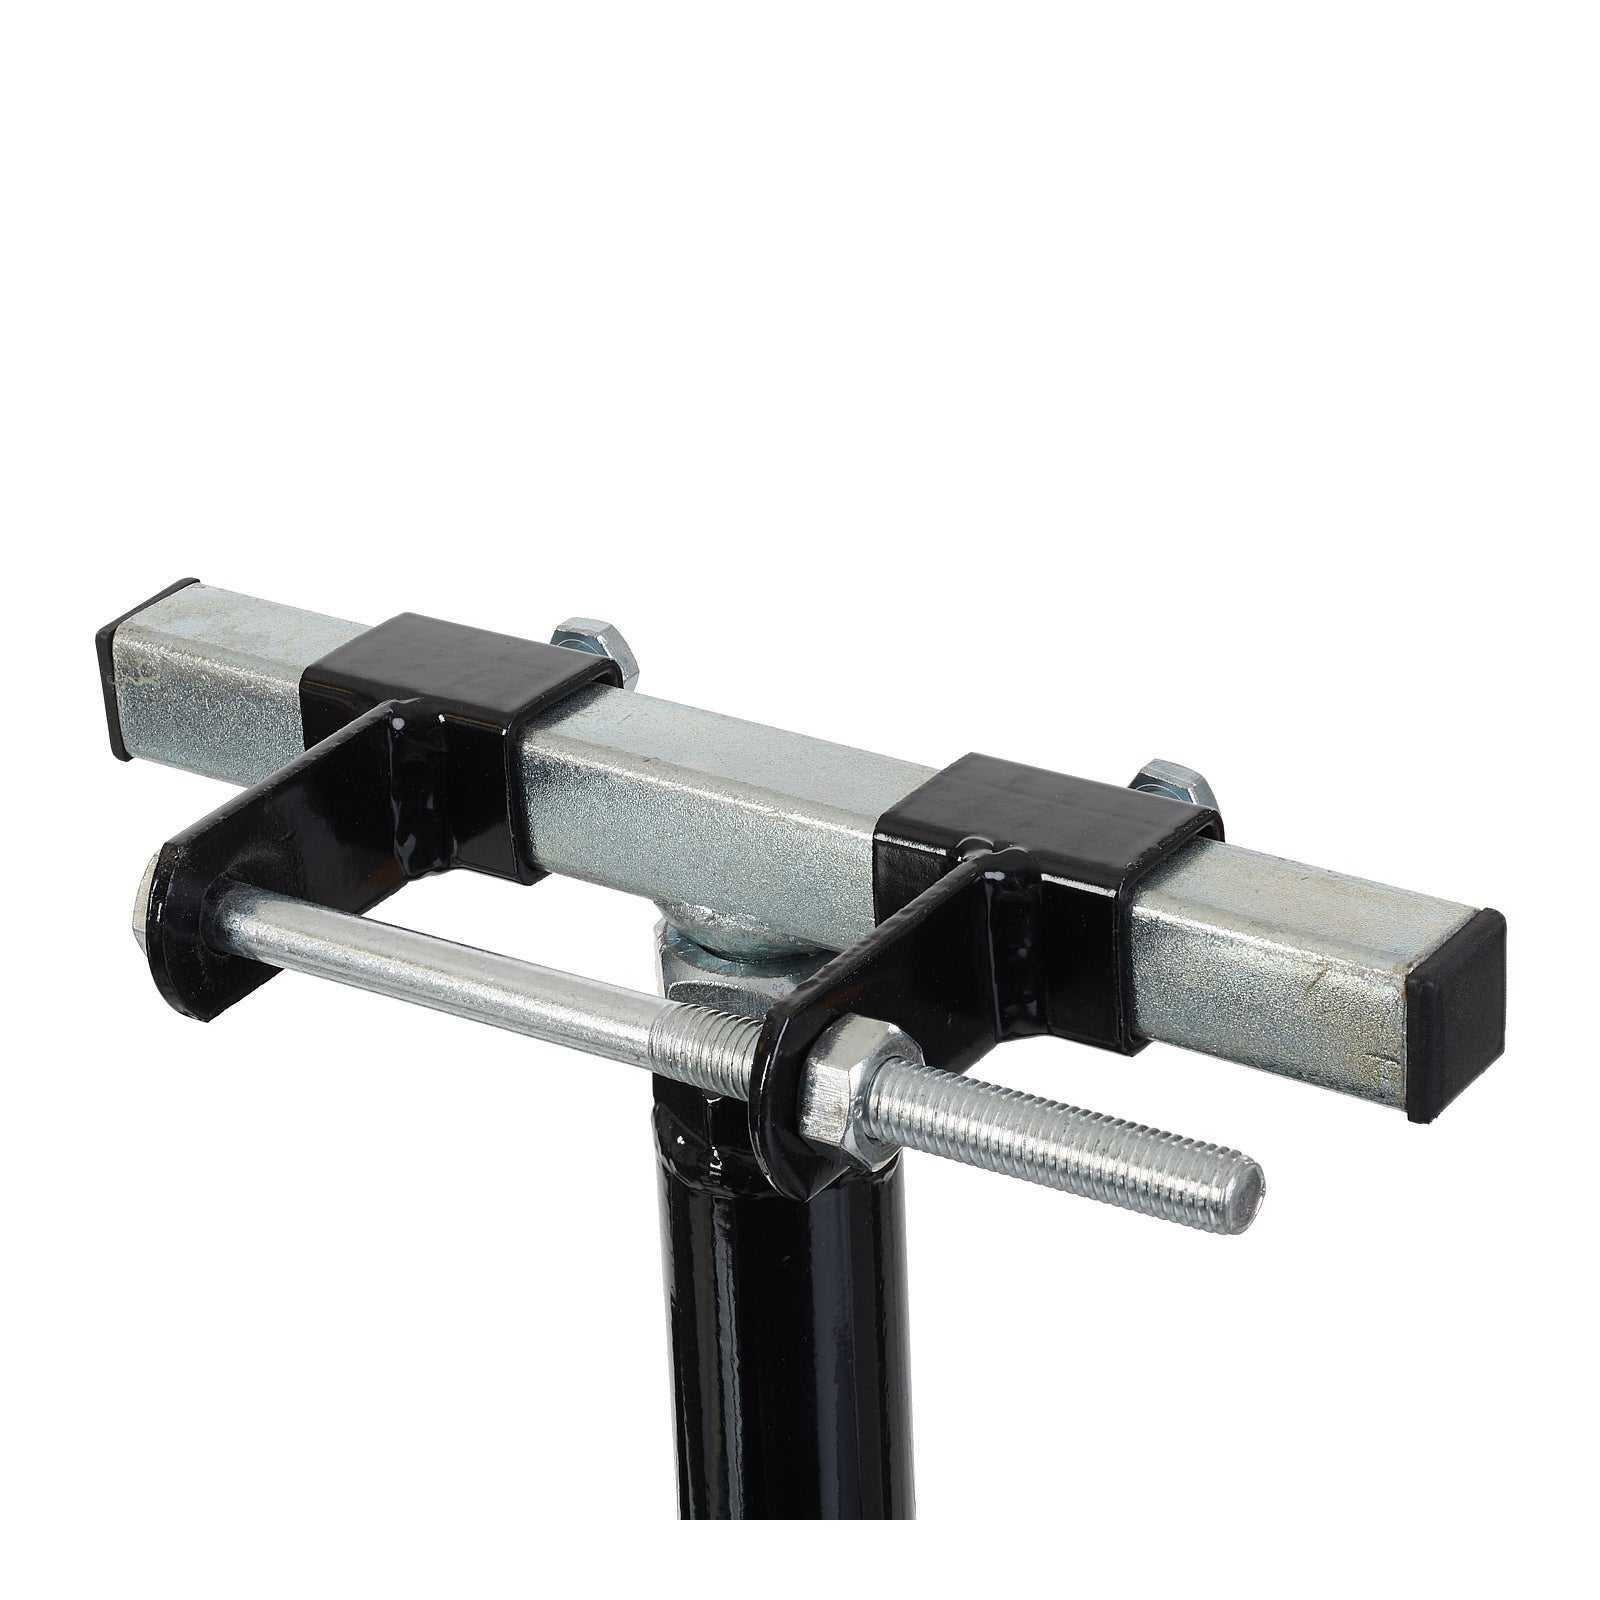 DRC, DRC Engine Stand Type A - Black